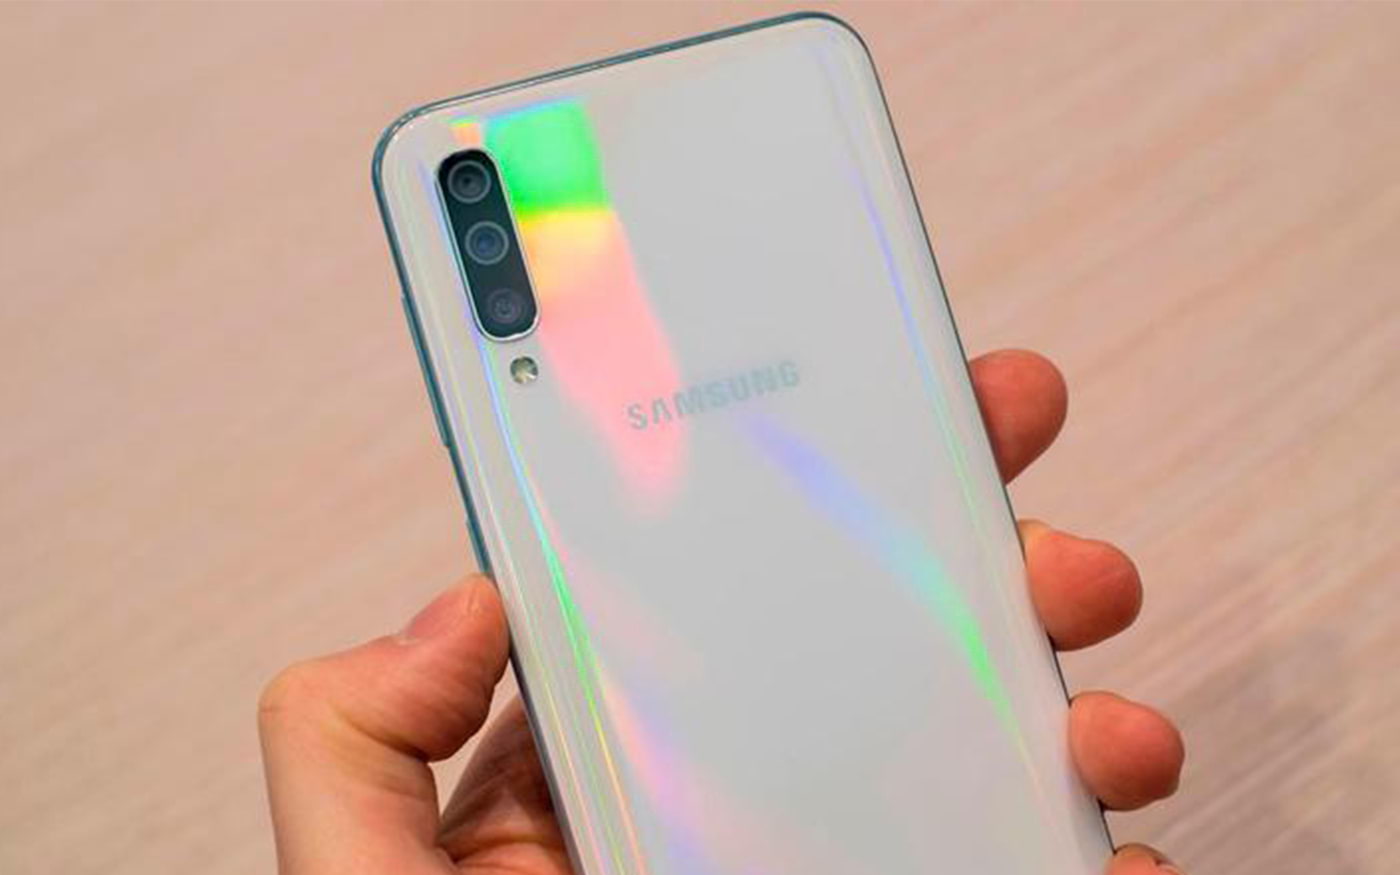 March security patch released for Galaxy A50